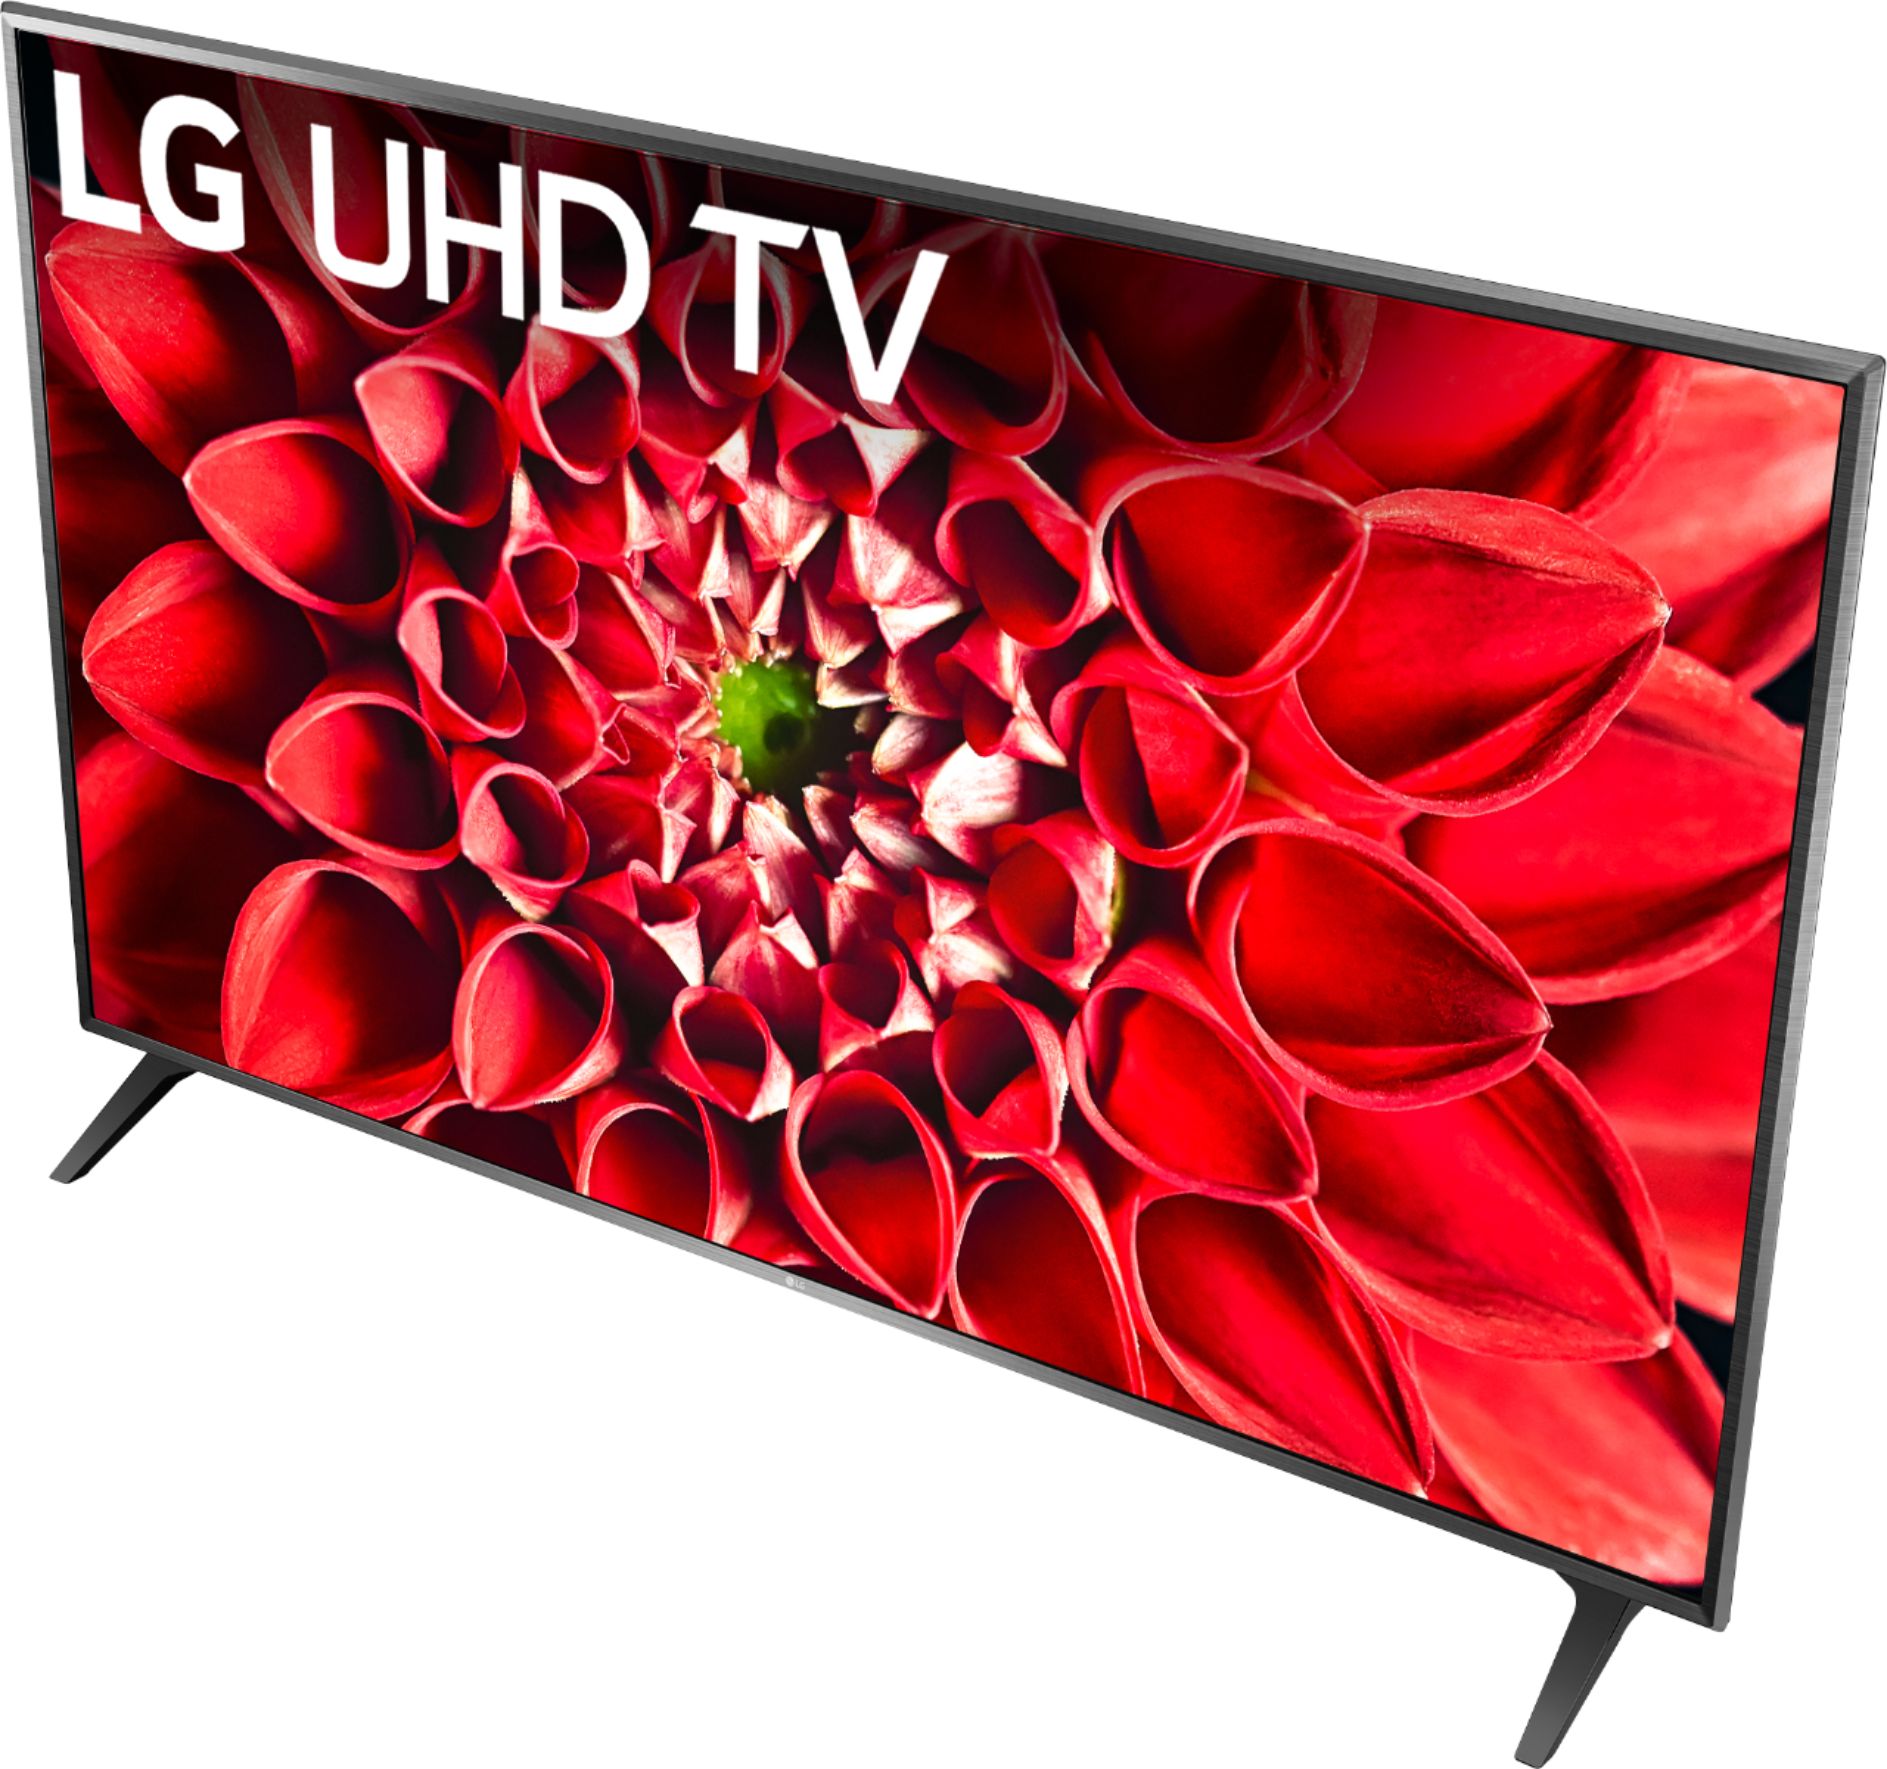 5 Things You Can Buy for the Price of LG's $70,000, 105-Inch TV